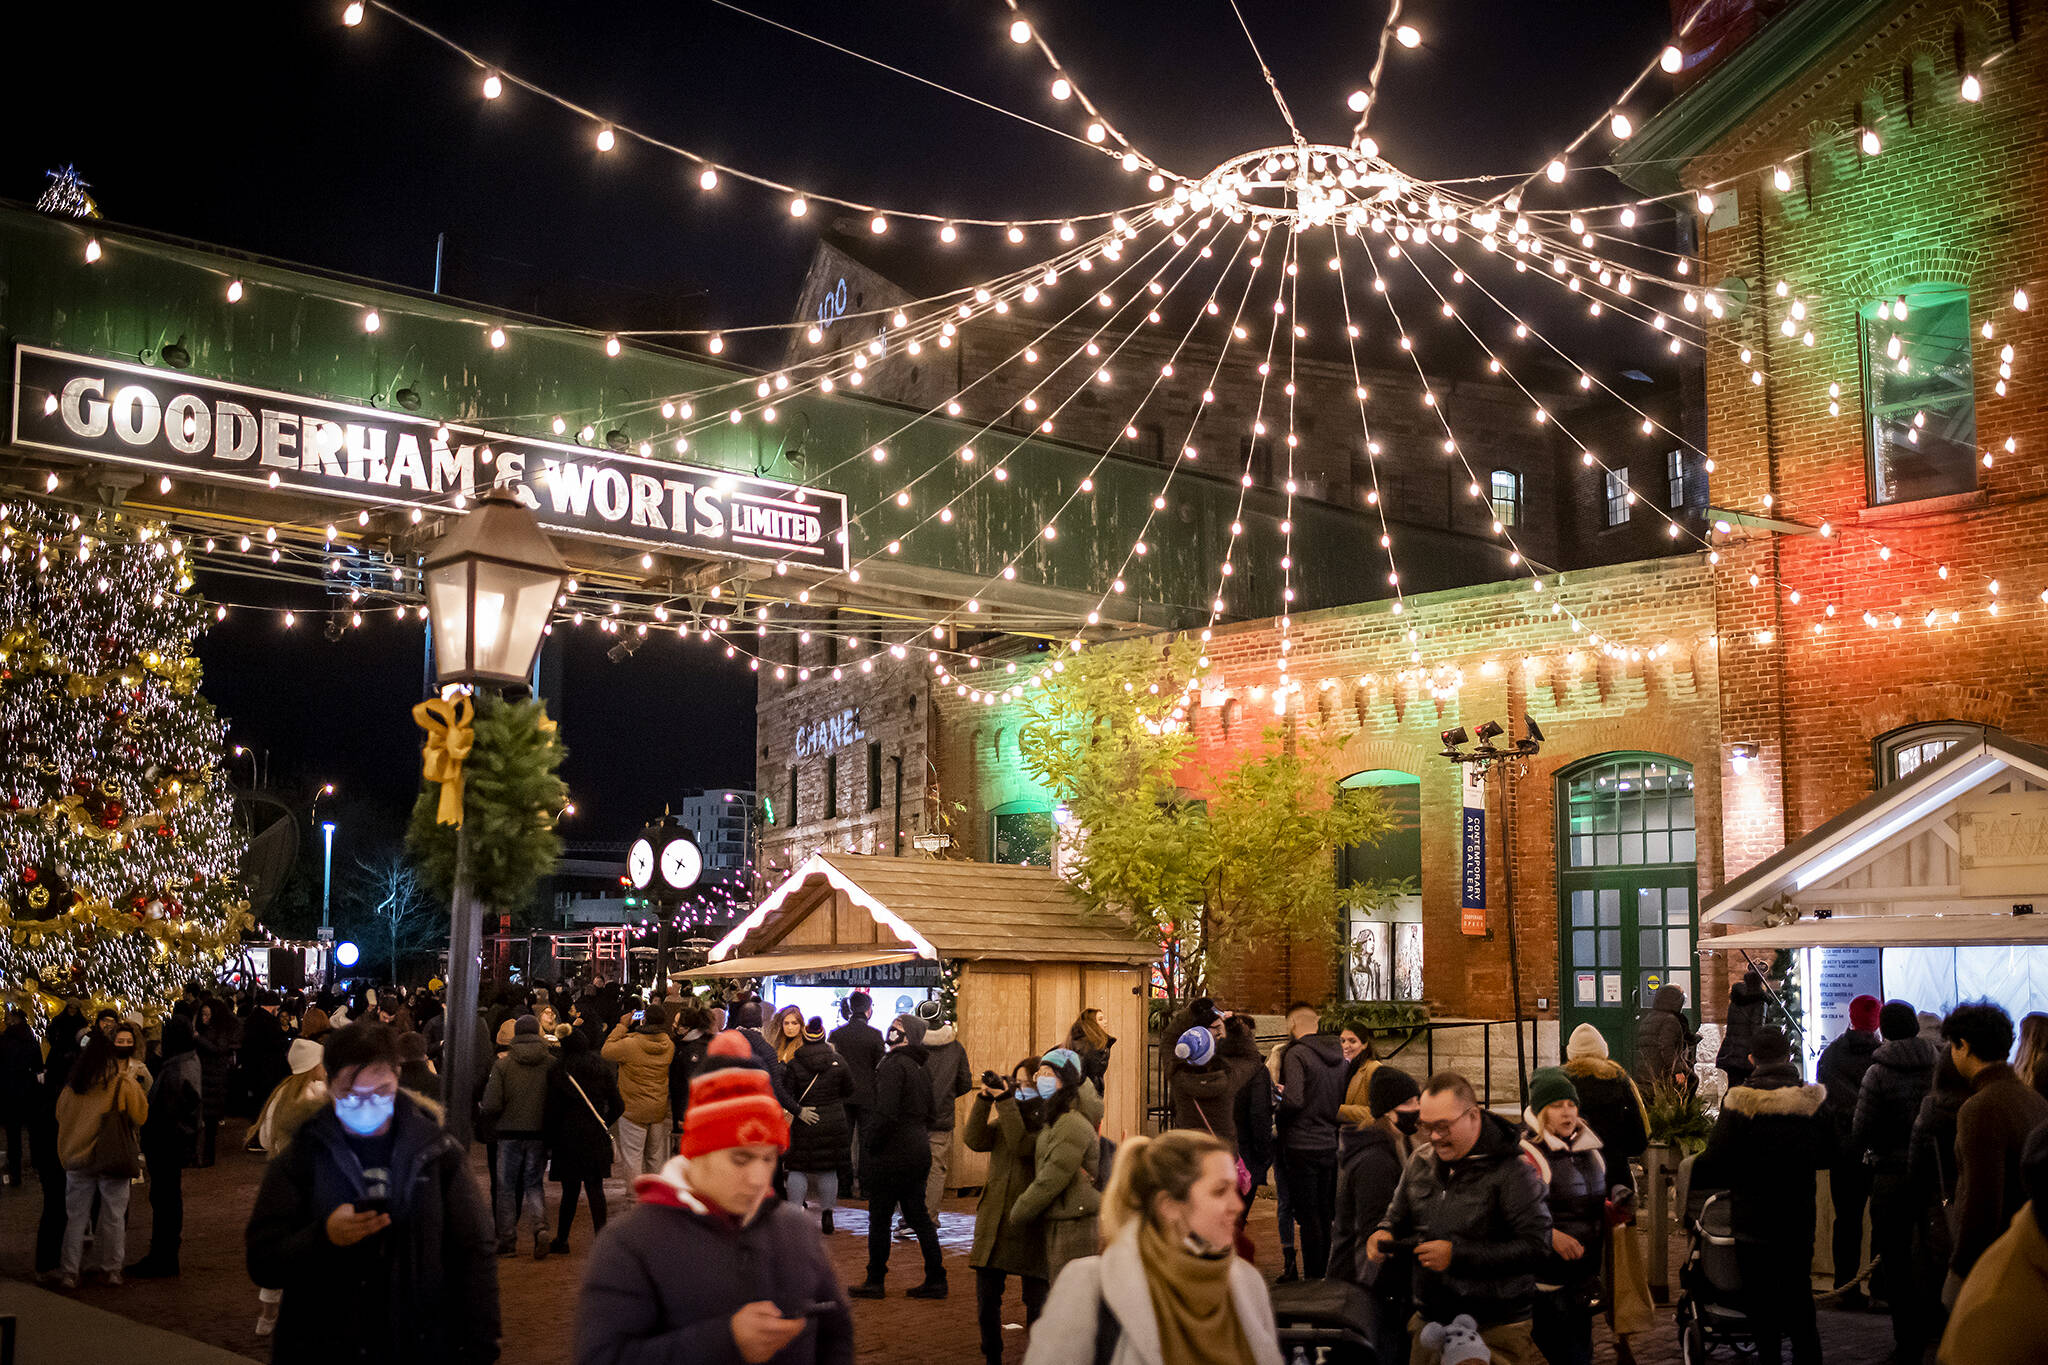 The Toronto Christmas Market opens with a tree lighting ceremony this week